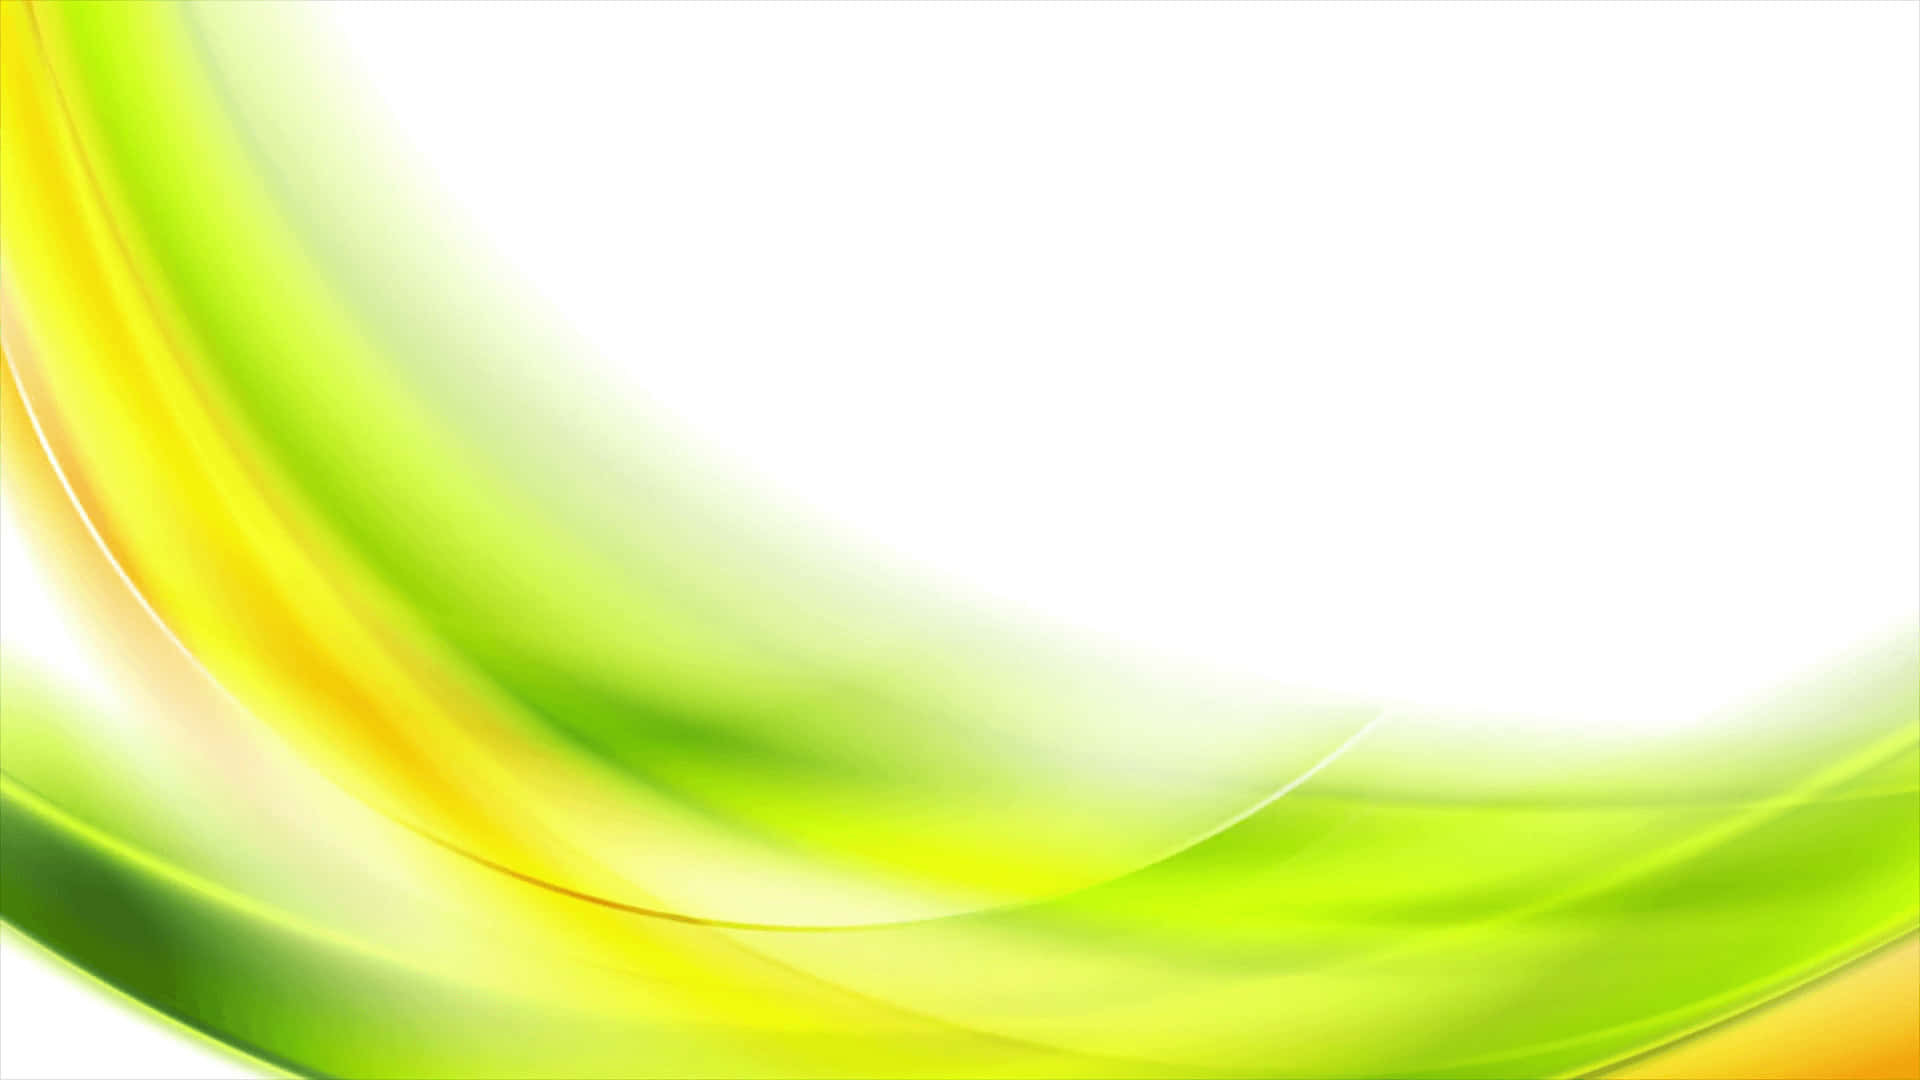 Abstract Green And Yellow Wave Background